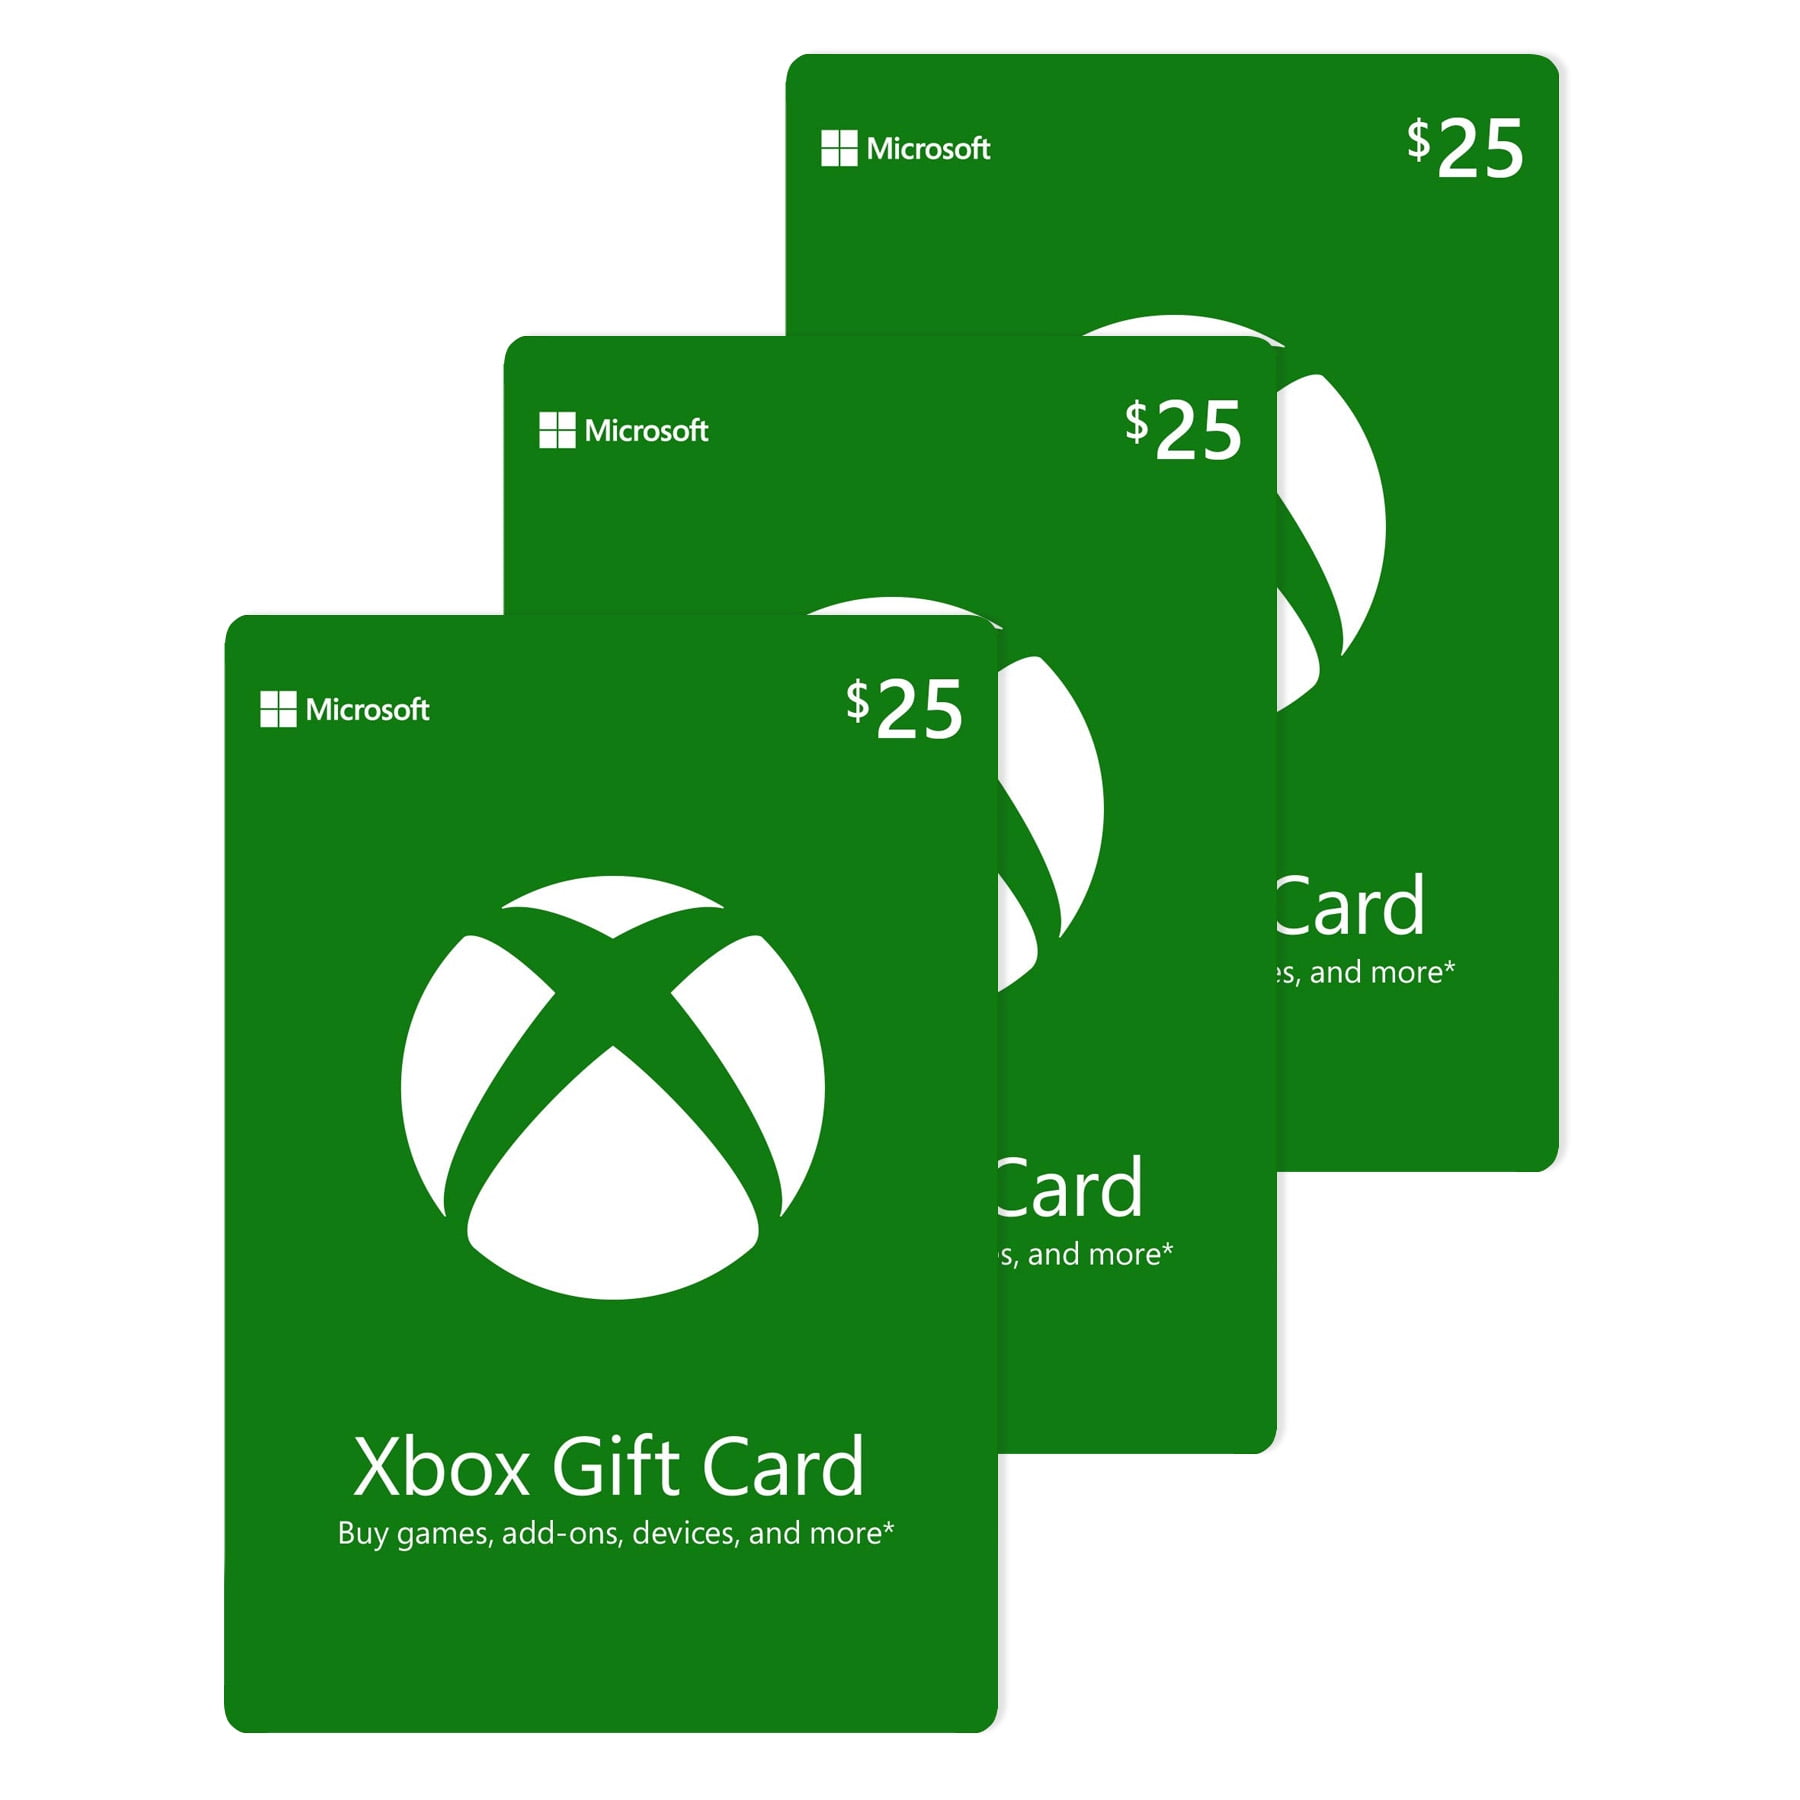 Nominaal Catastrofe beddengoed Microsoft XBOX Physical Gift Cards $75.00 Multi-Pack ( 3 x $25.00 cards) -  Walmart.com